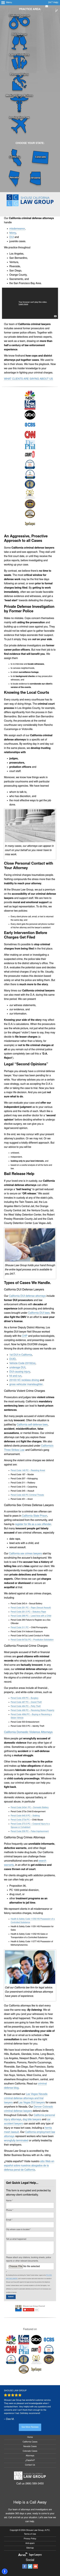 Shouse Law Group - Ontario CA Lawyers